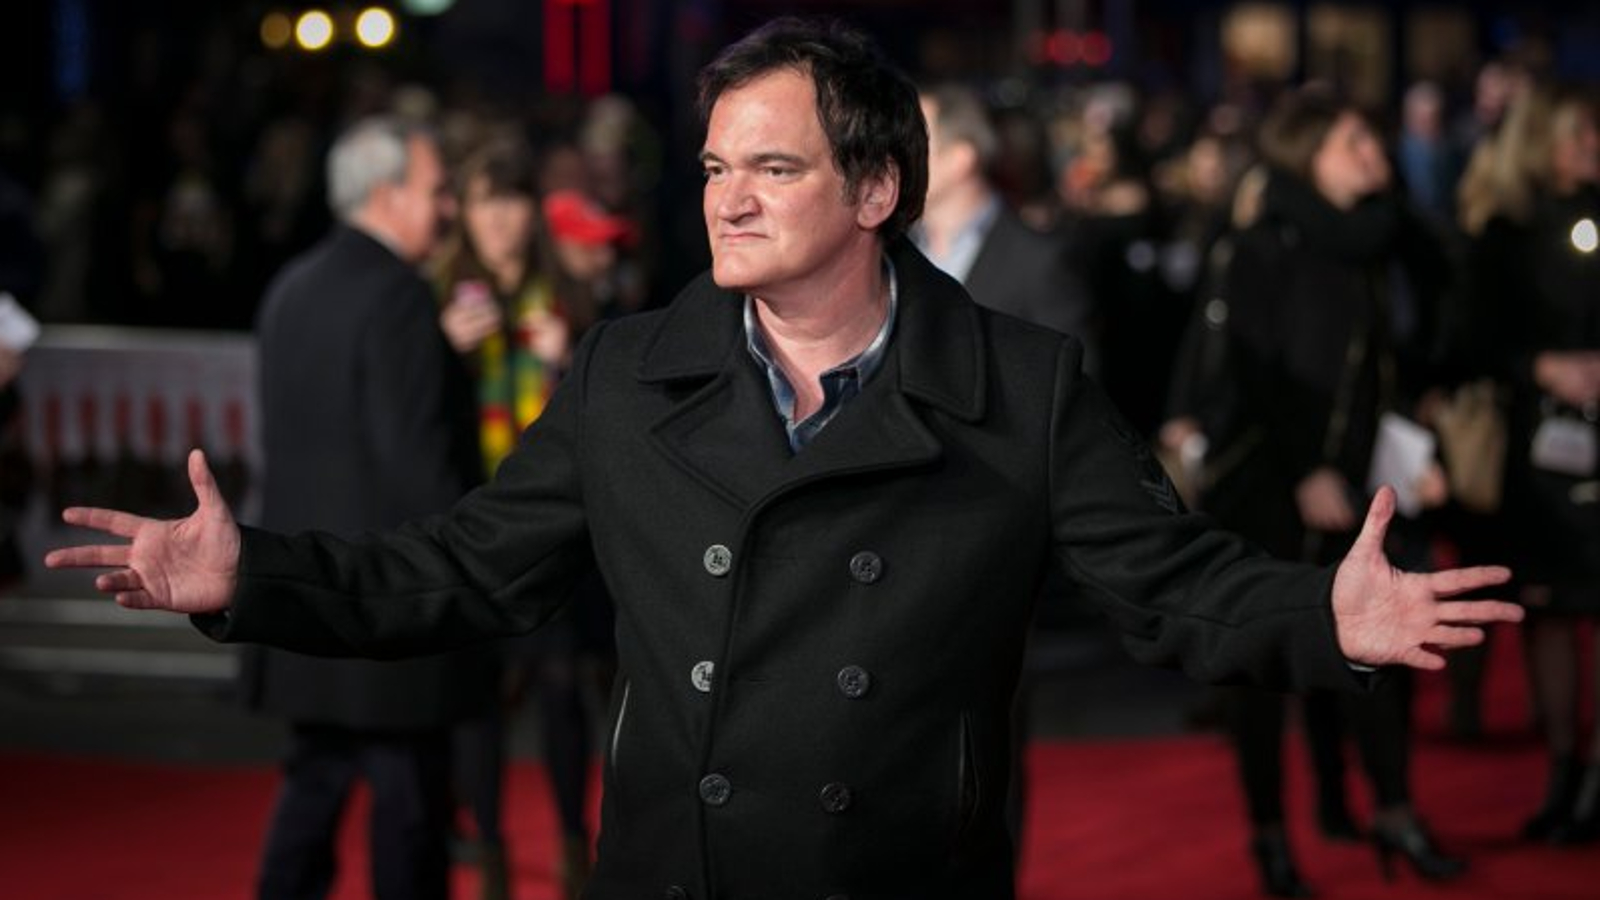 Quentin Tarantino: Jamie Foxx and Edgar Wright celebrate the director's 60th birthday in London